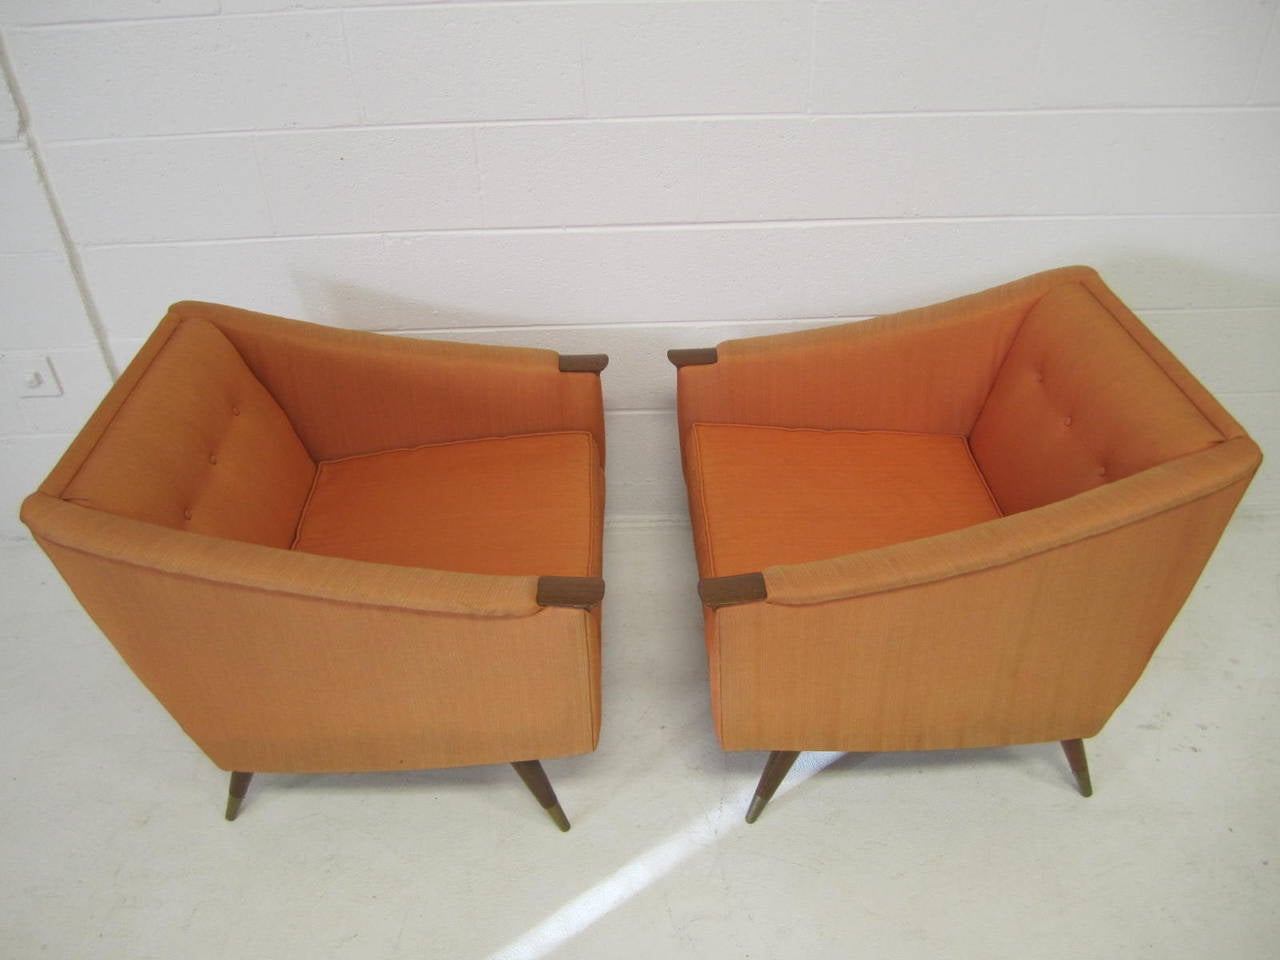 Unusual pair of signed Karpen lounge chairs. Wonderful carved walnut pads give the arms a very stylish and sophisticated feel. The chairs have excellent form and function.